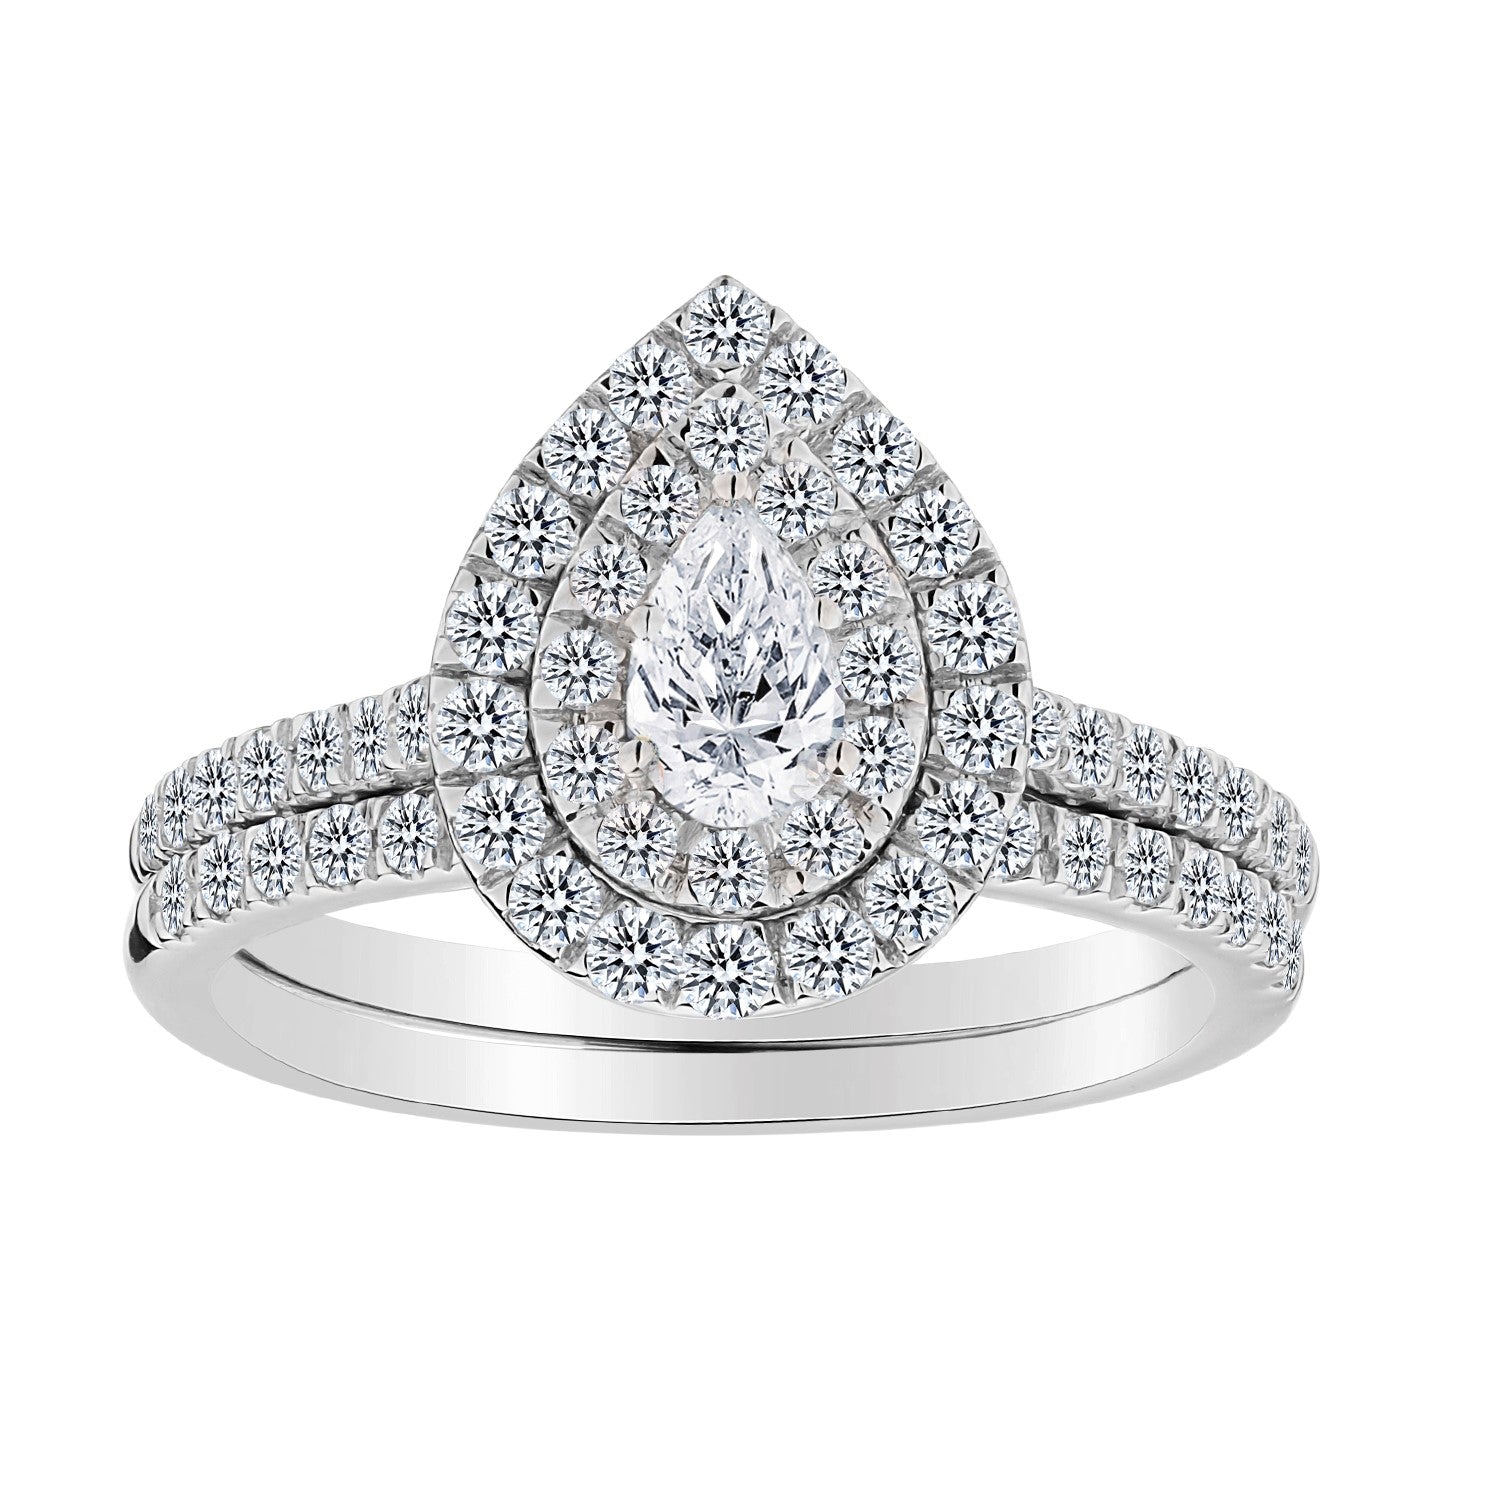 .25 Carat Pear Centre,  1.00 Total Diamond Weight, Engagement Ring Set,  14kt White Gold. Griffin Jewellery Designs